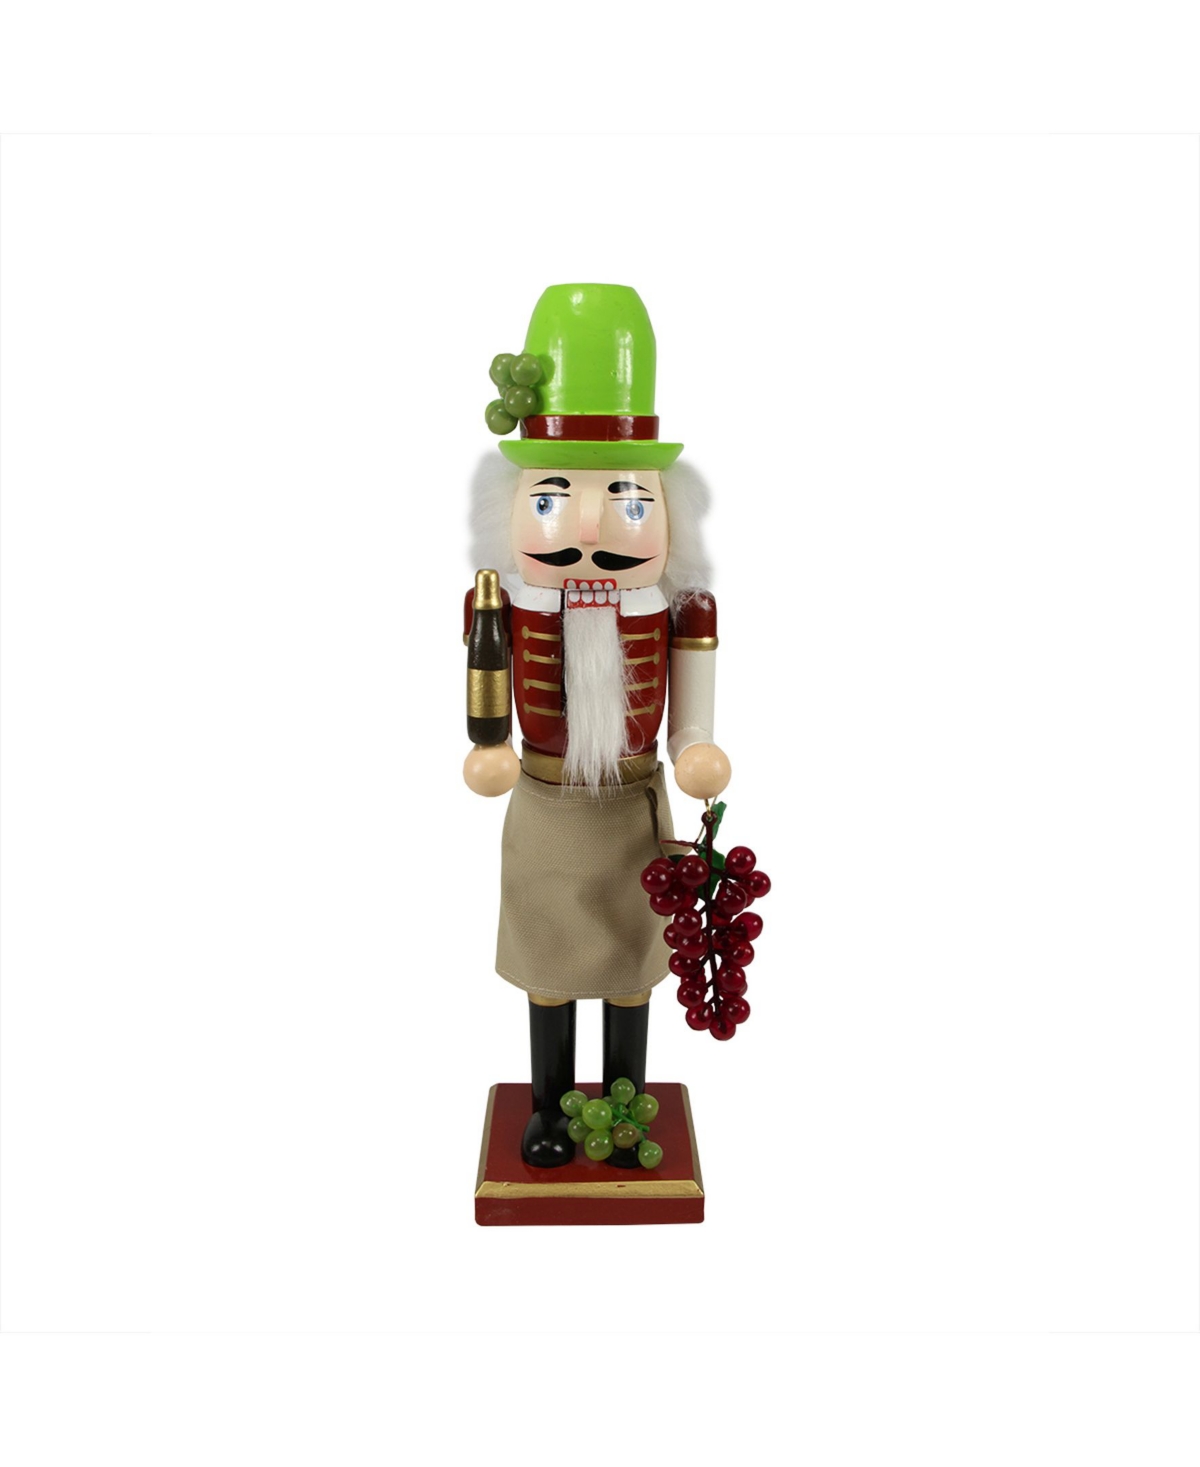 Winemaker with Grapes and Wine Christmas Nutcracker - Green